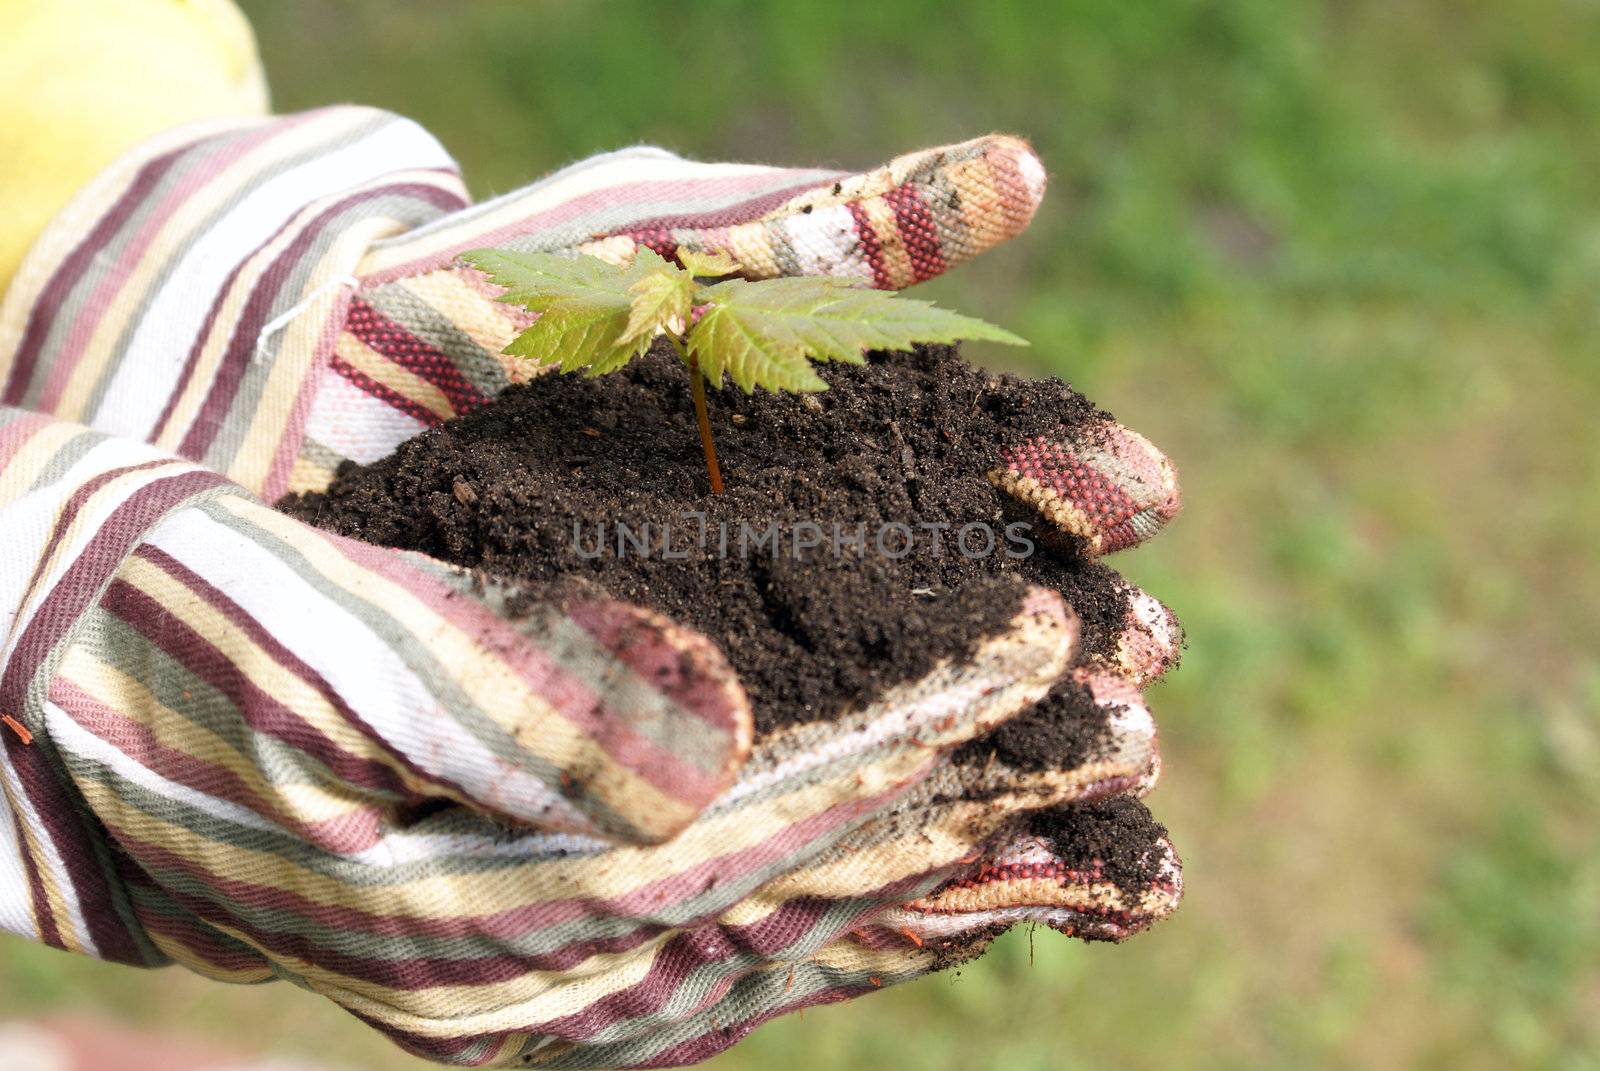 A gardener protects the new life of a tree in the palm of her hands.